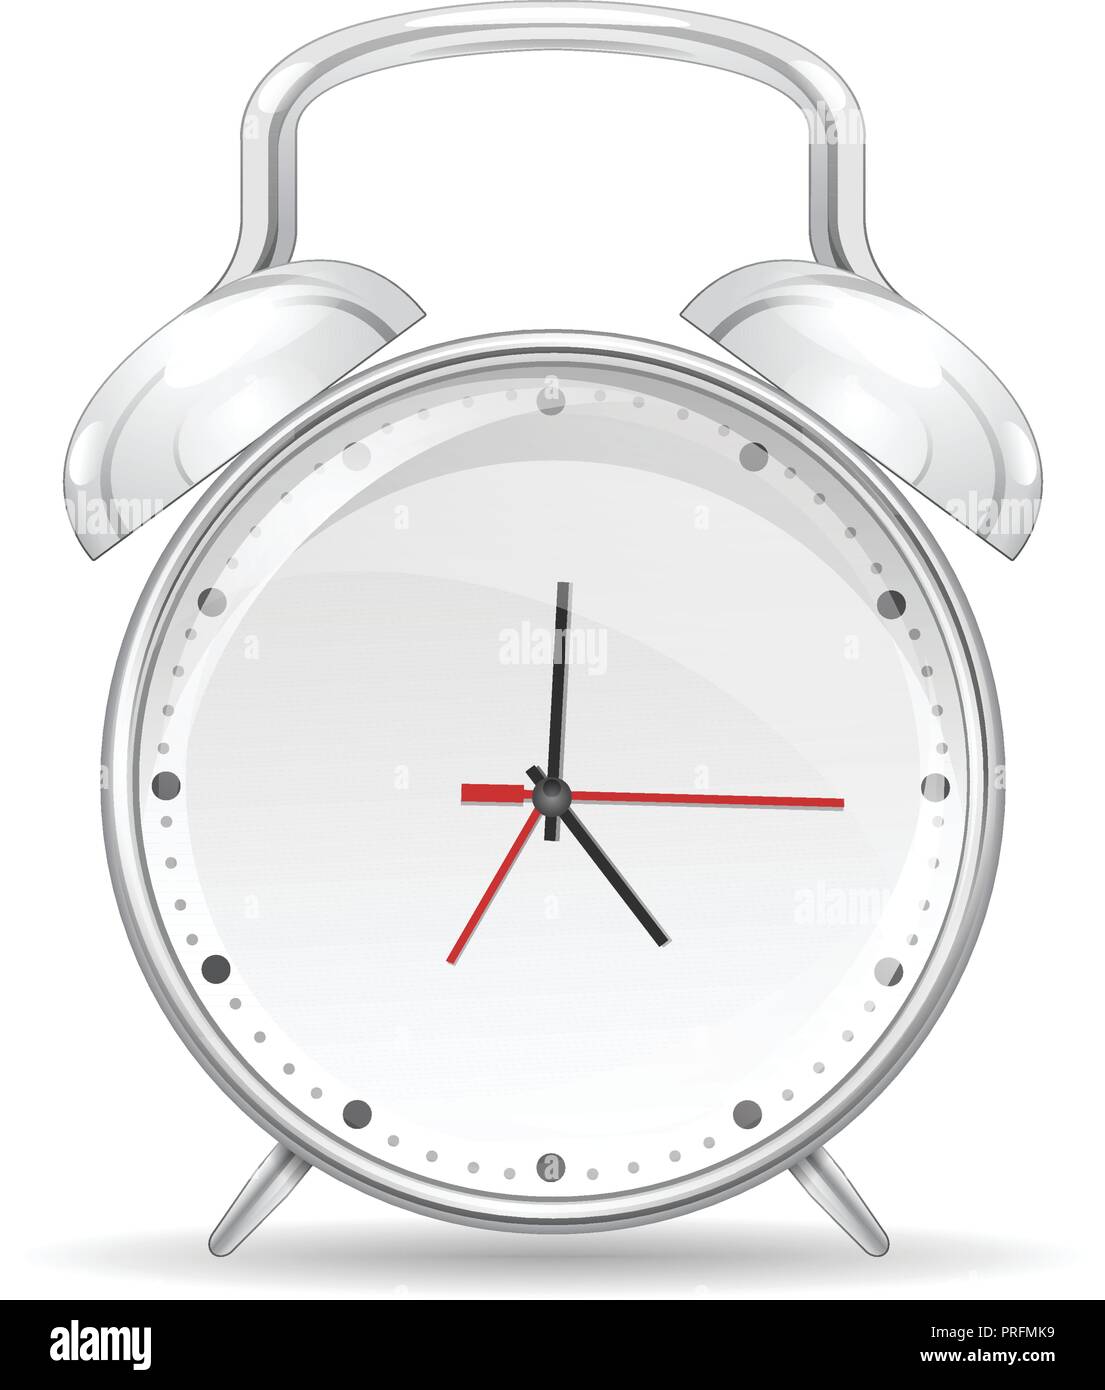 Realistic red metal alarm clocks. Vector illustration on white background Stock Vector